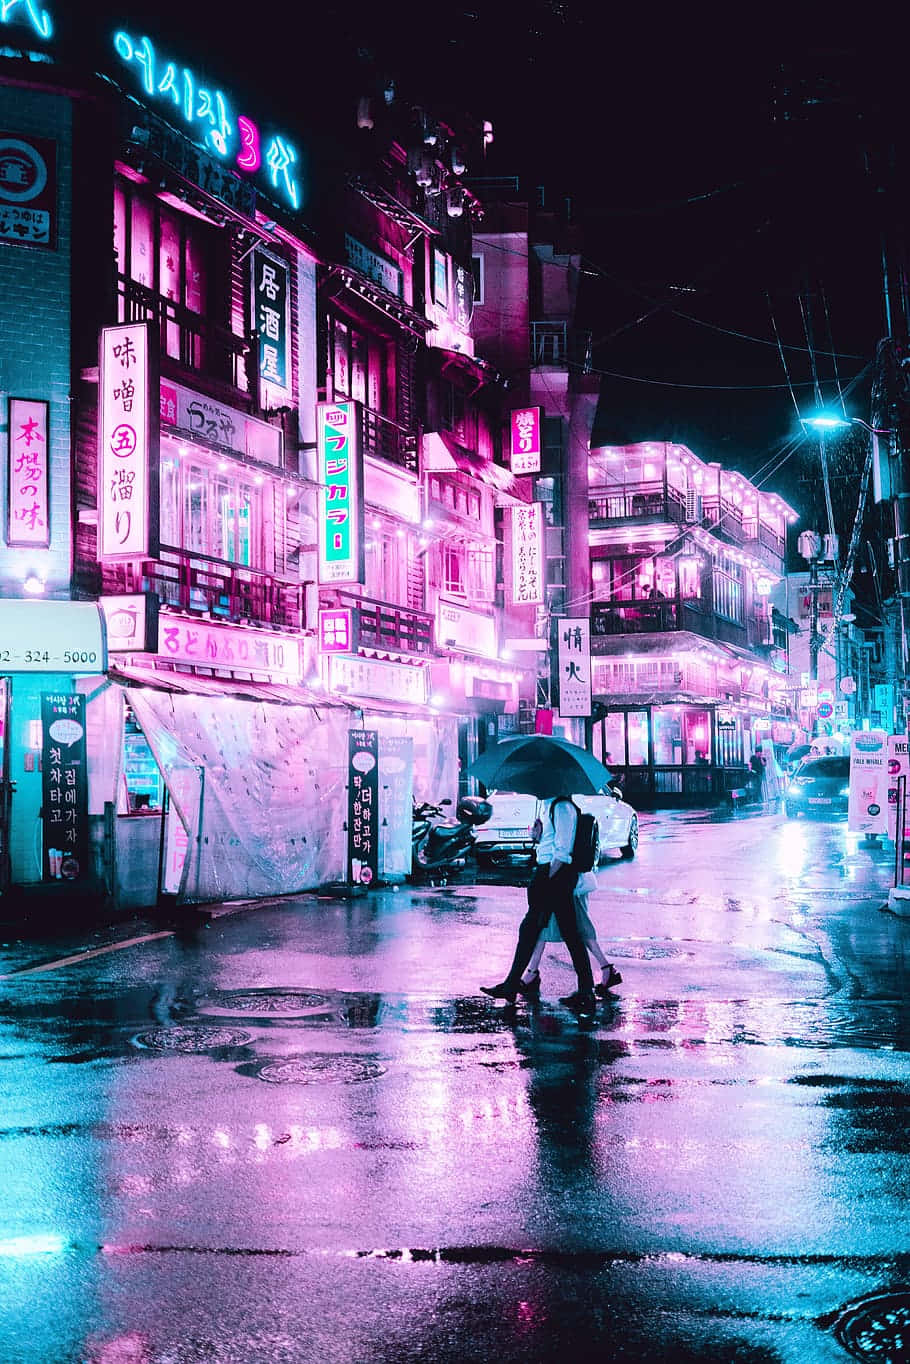 Take a virtual stroll through the pastel neon streets of this futuristic city. Wallpaper